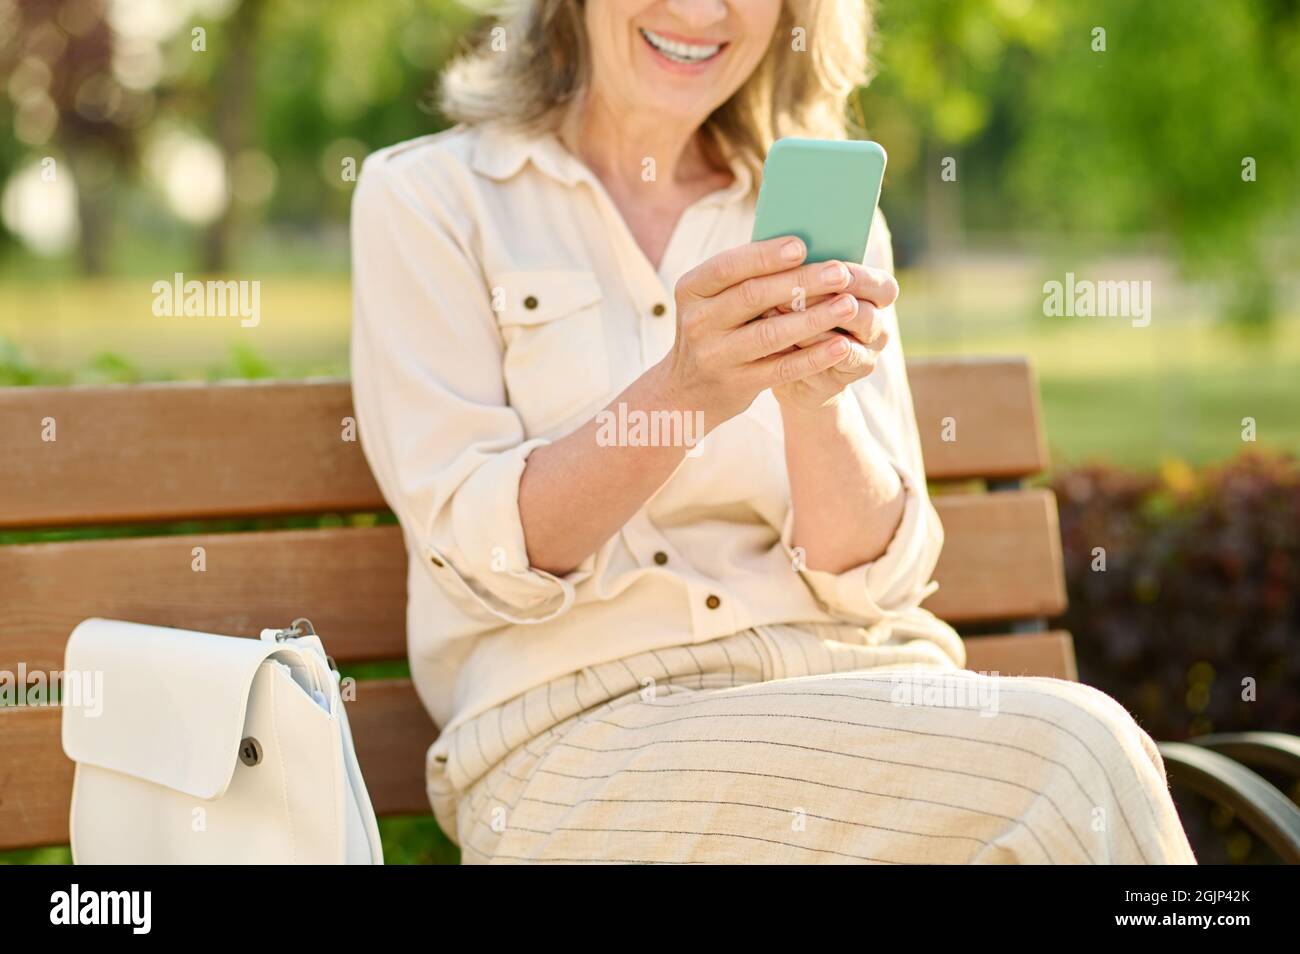 Joyfully smiling woman with smartphone in hands Stock Photo